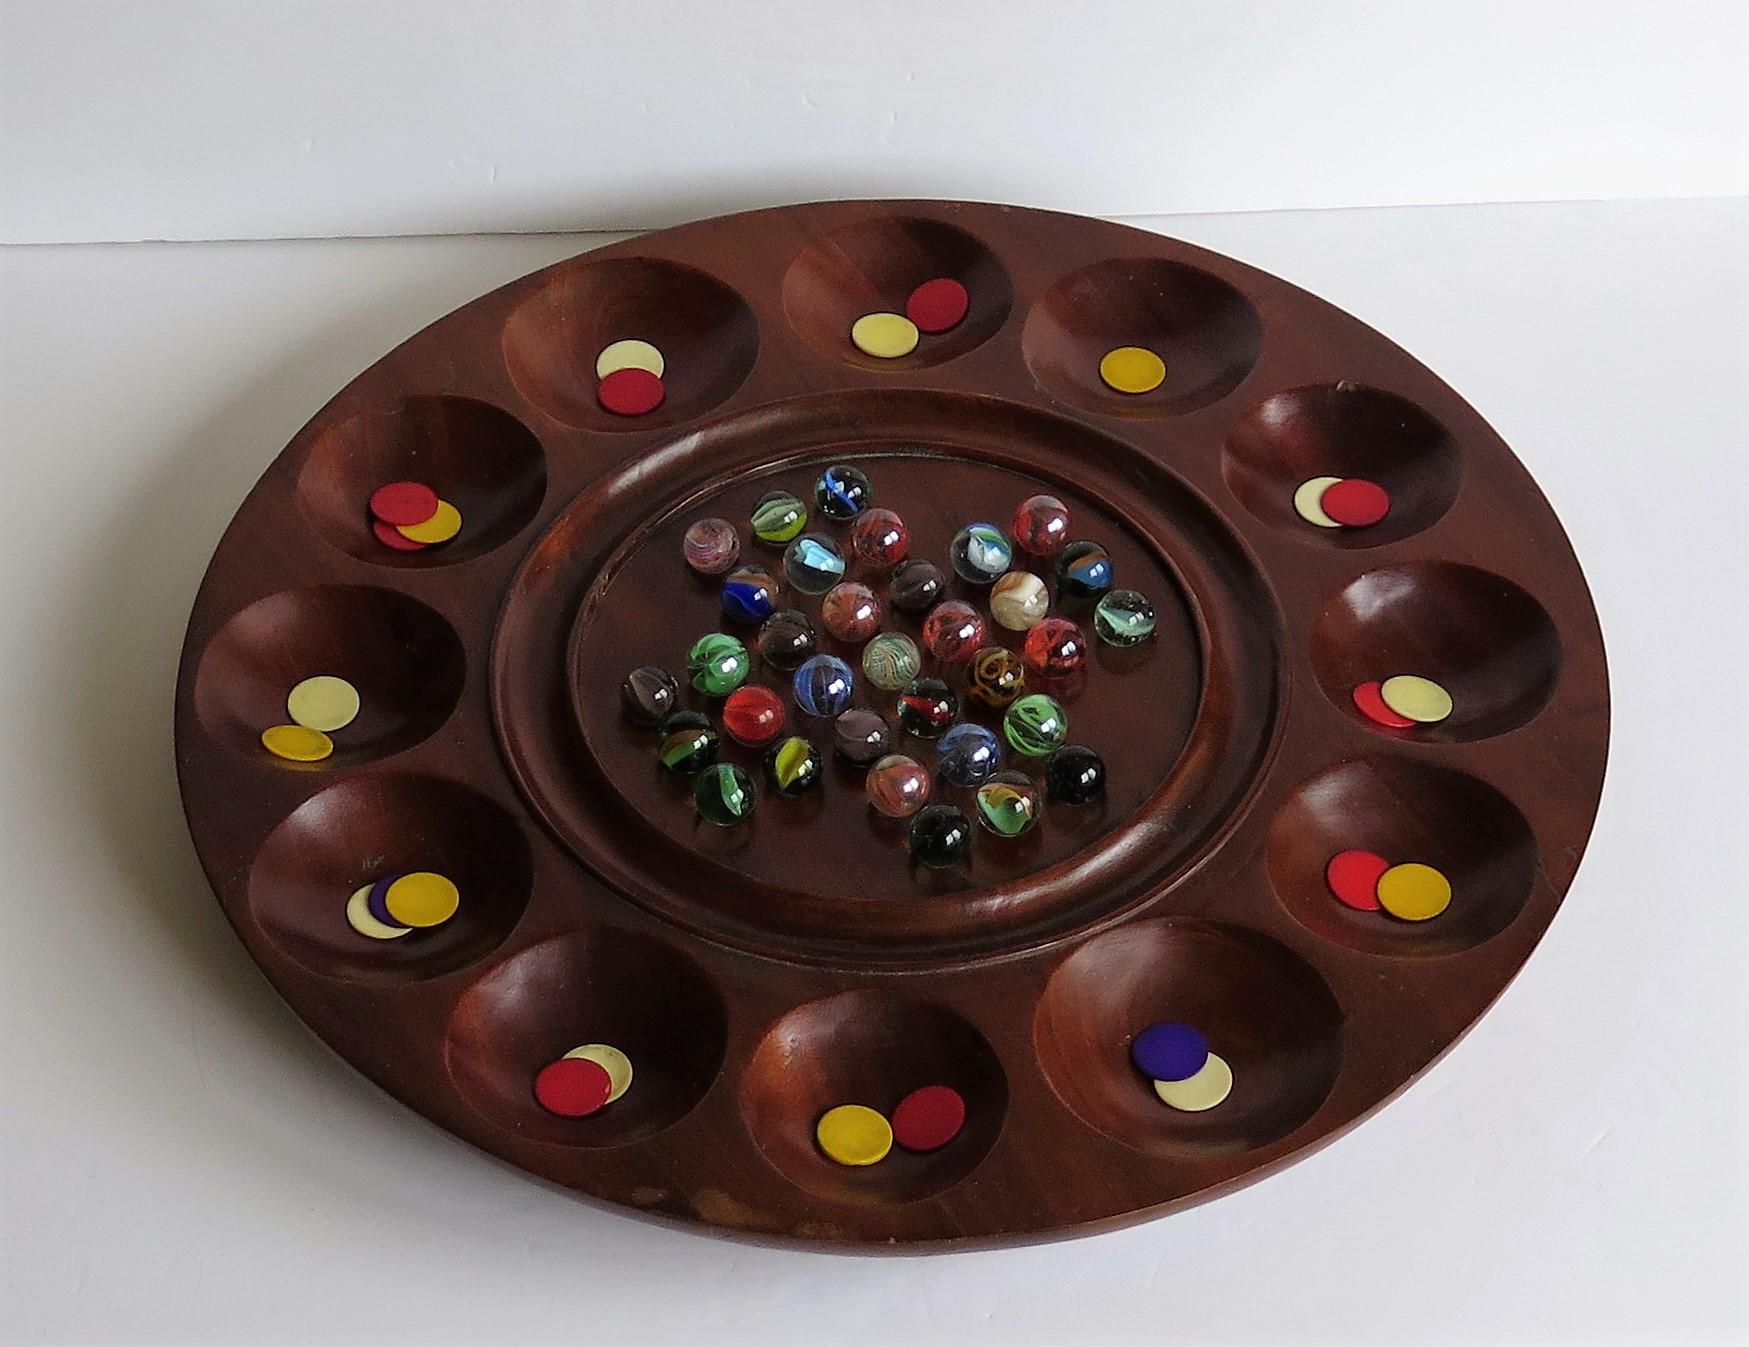 This is a complete combination board game of marble solitaire and tiddlywinks, dating to the early 20th century.

This is a most unusual and very decorative game set with a beautiful board. 

The circular turned board is very attractive being